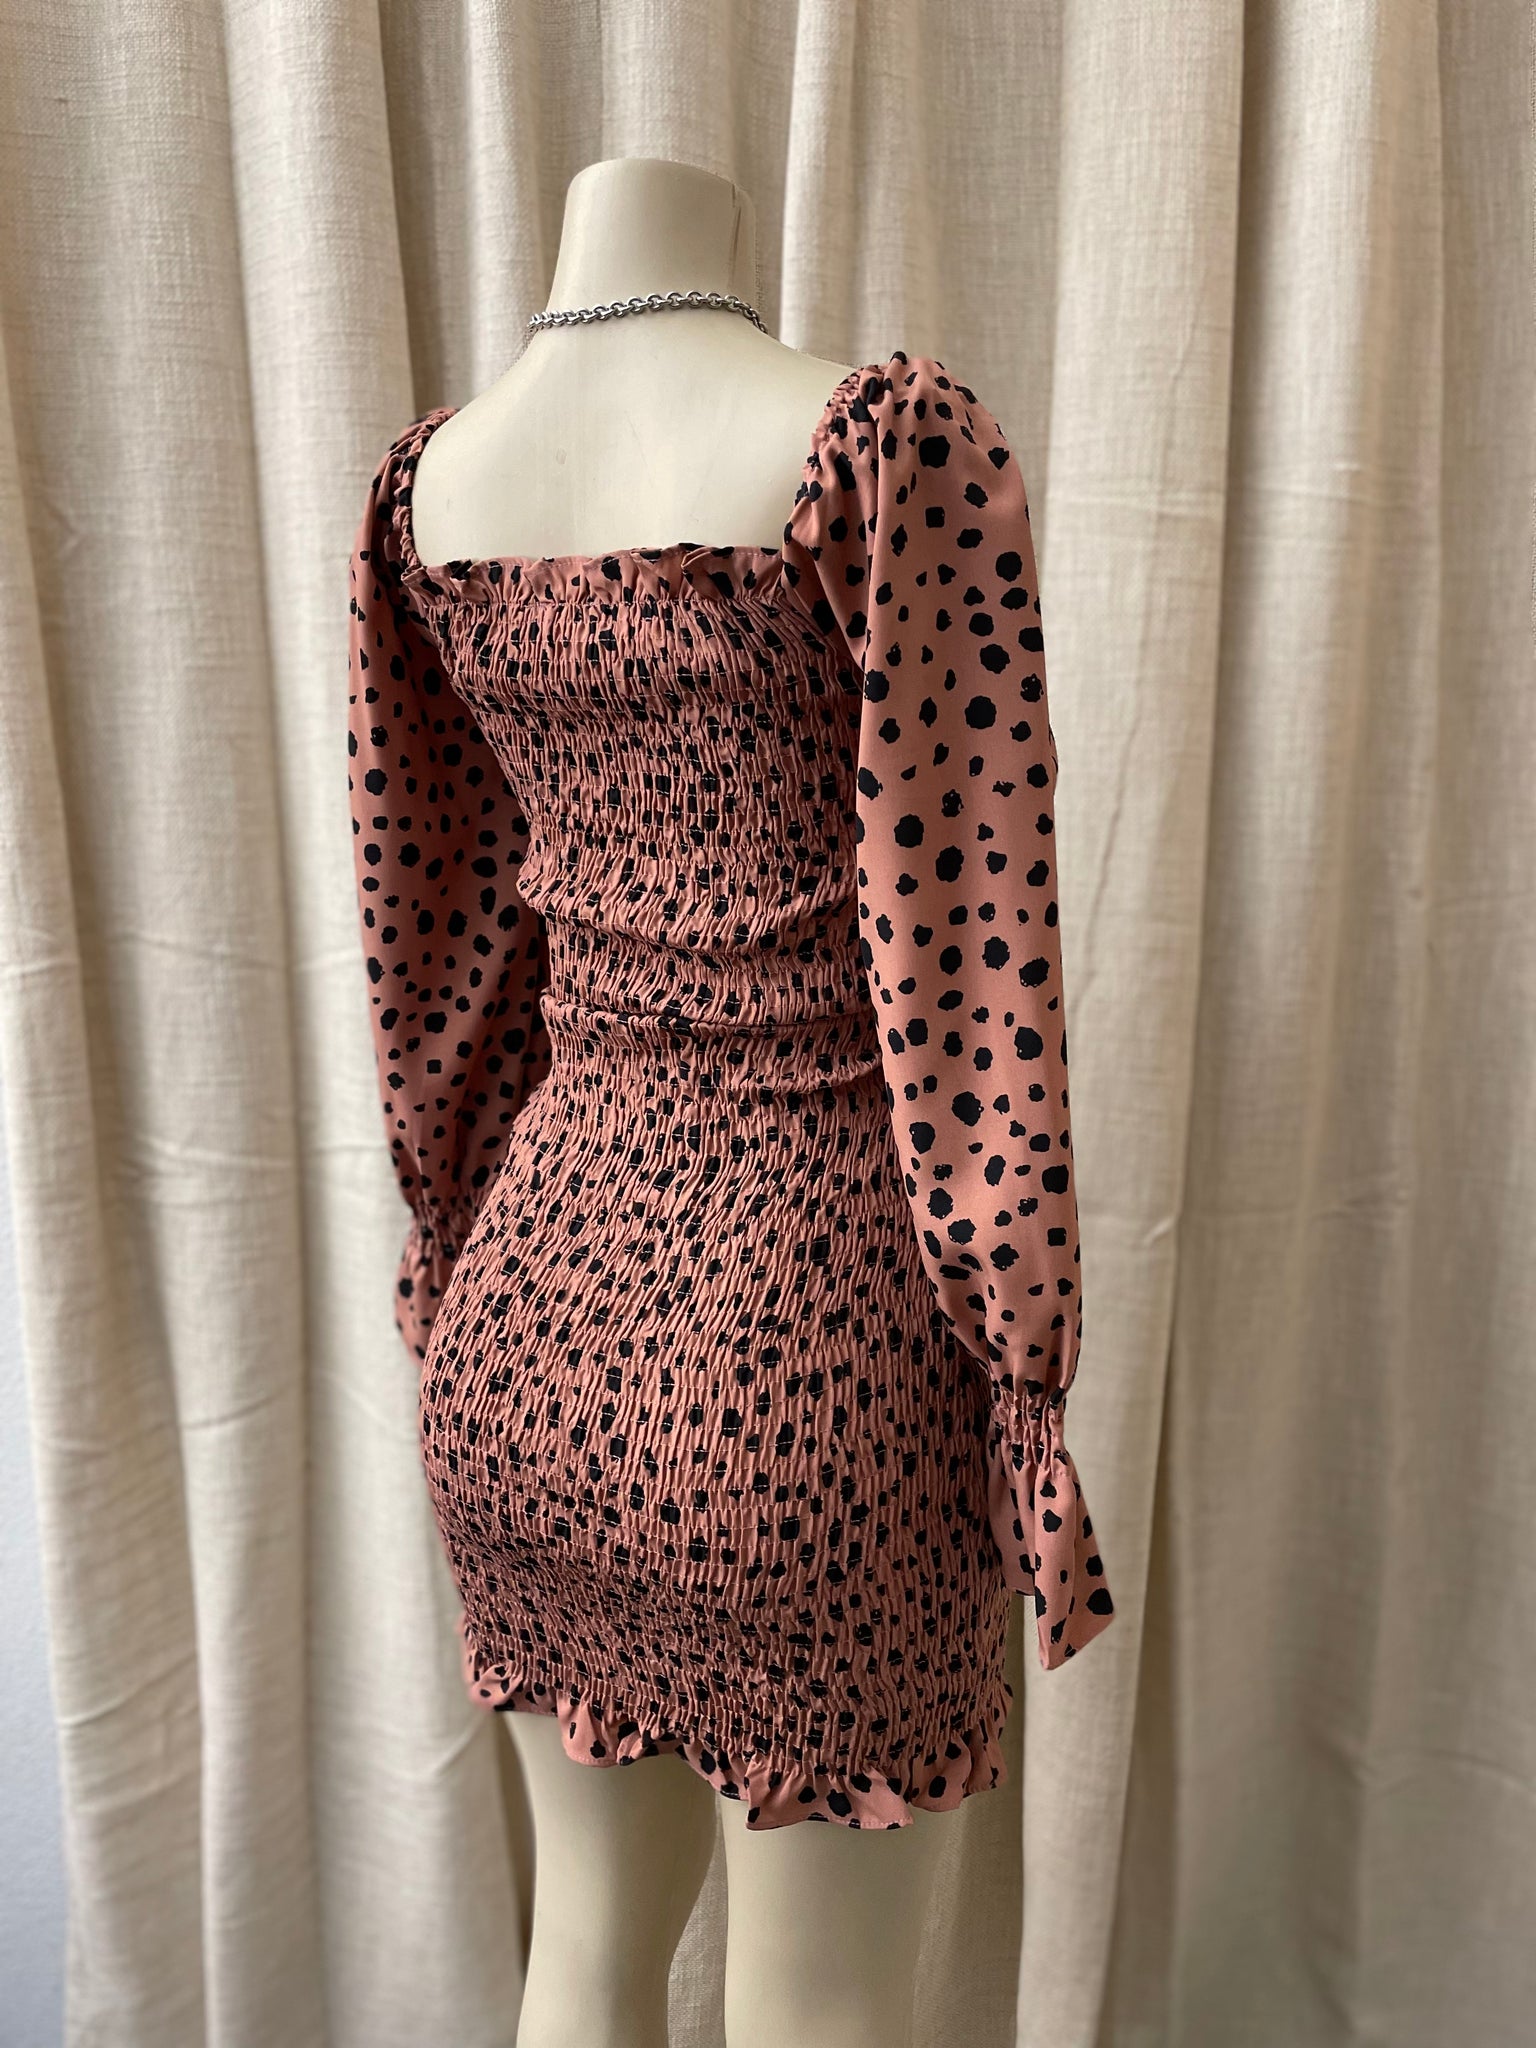 The “Betty” Cheetah Spotted Ruched Dress